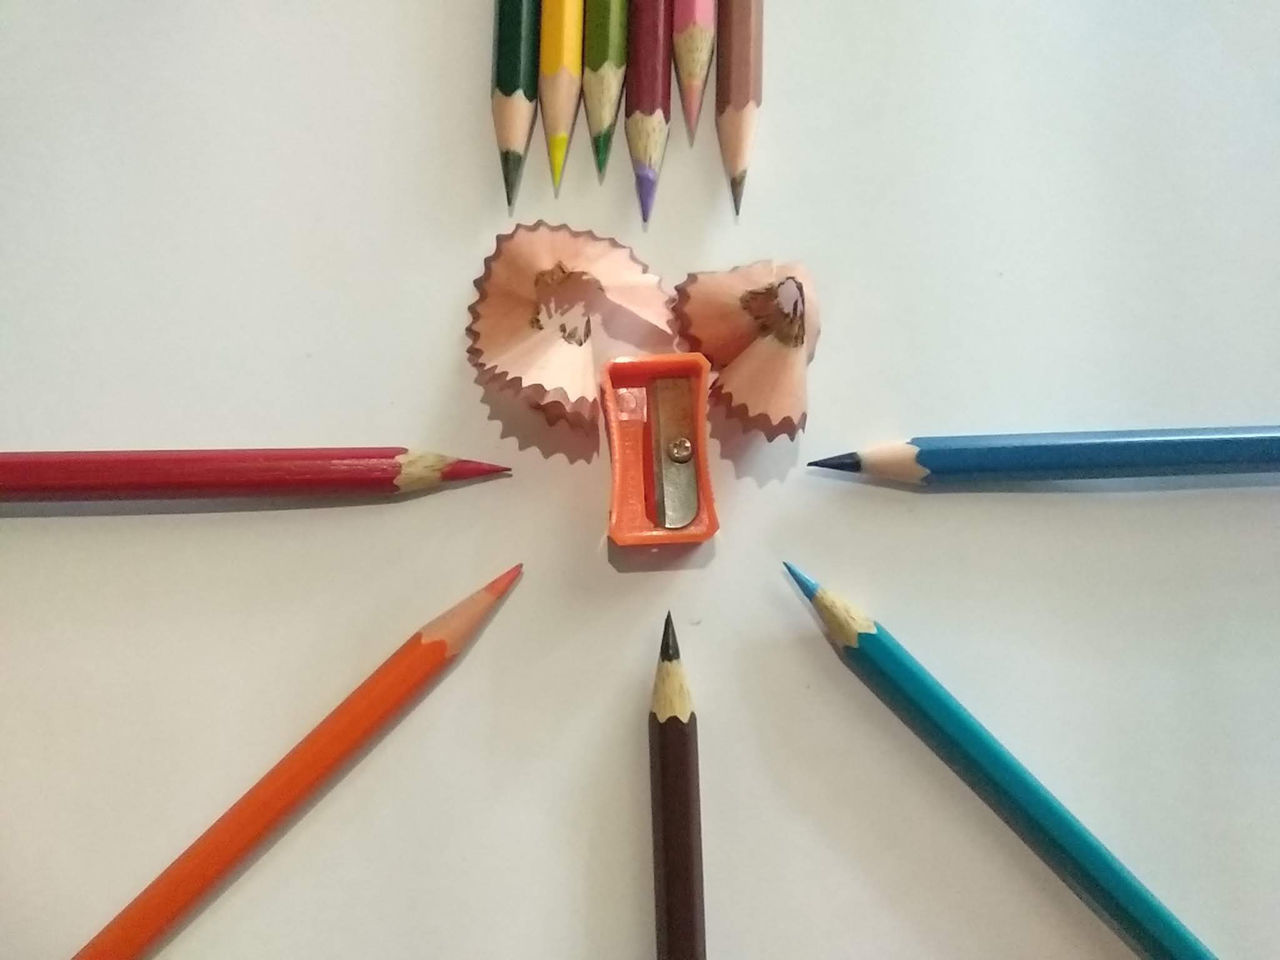 HIGH ANGLE VIEW OF COLORED PENCILS ON TABLE AGAINST WHITE BACKGROUND